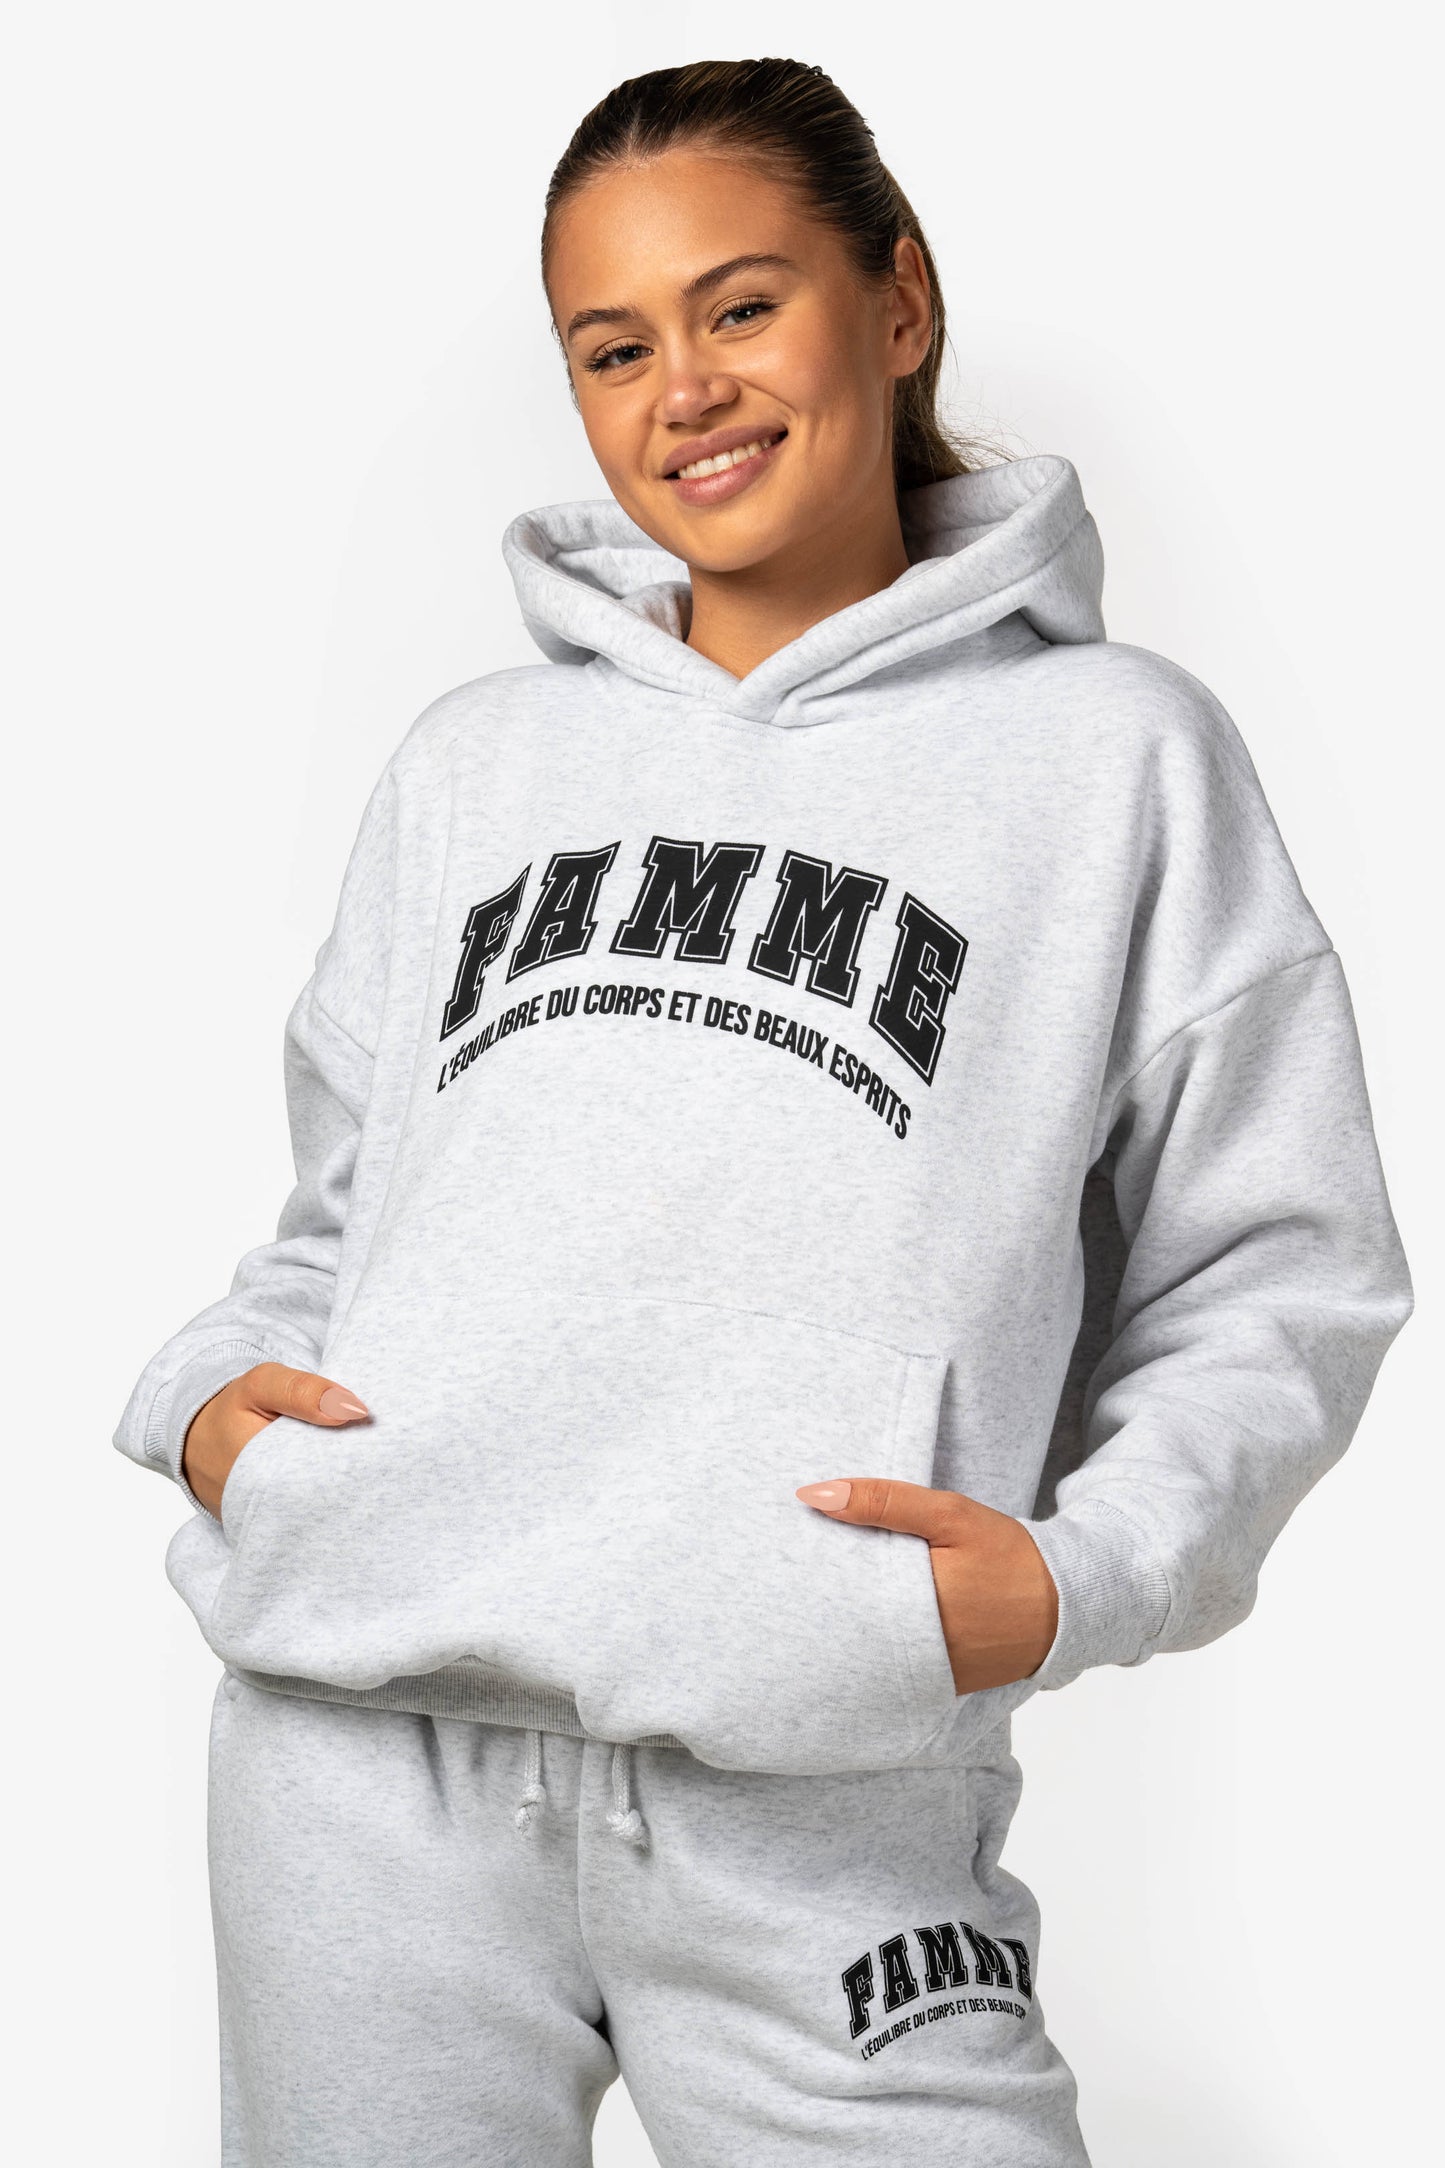 Grey Oversized Hoodie - for dame - Famme - Hoodie